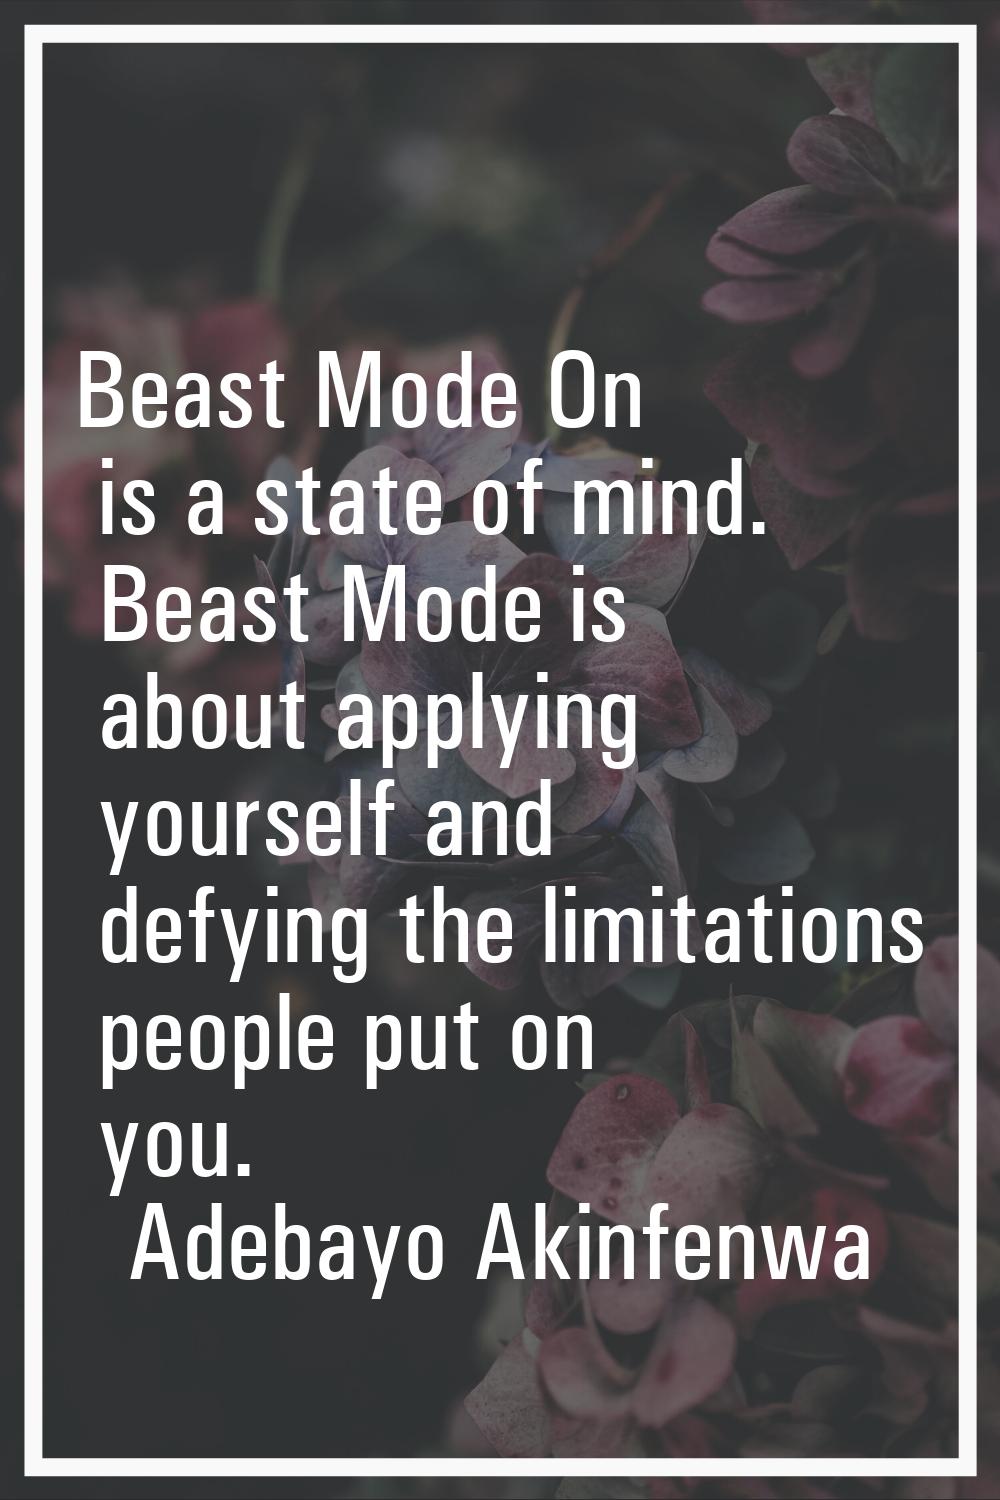 Beast Mode On is a state of mind. Beast Mode is about applying yourself and defying the limitations